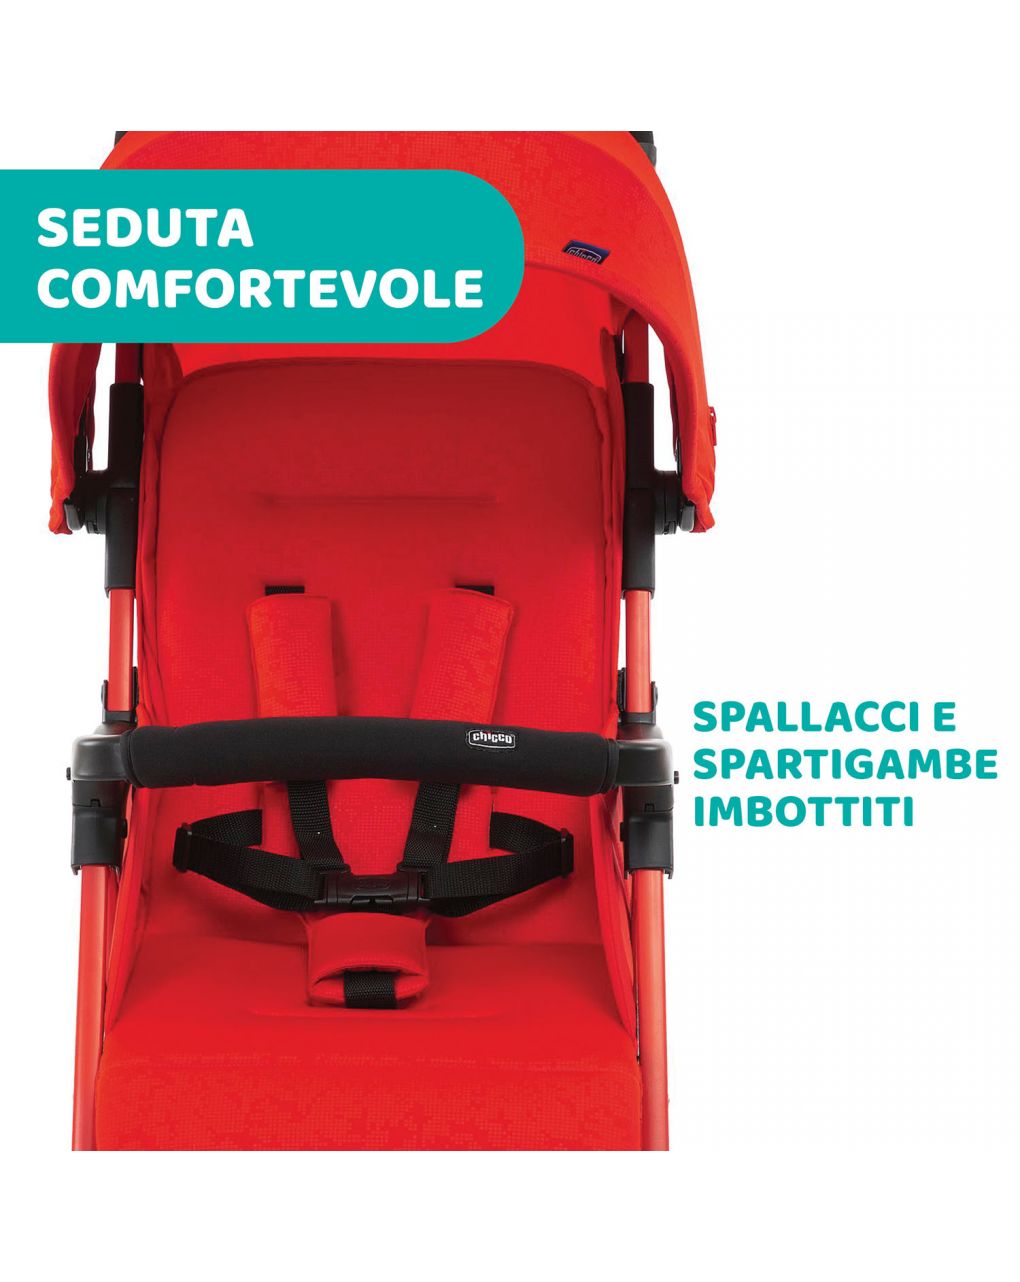 Stroller ohlalà 3 red passion - Chicco